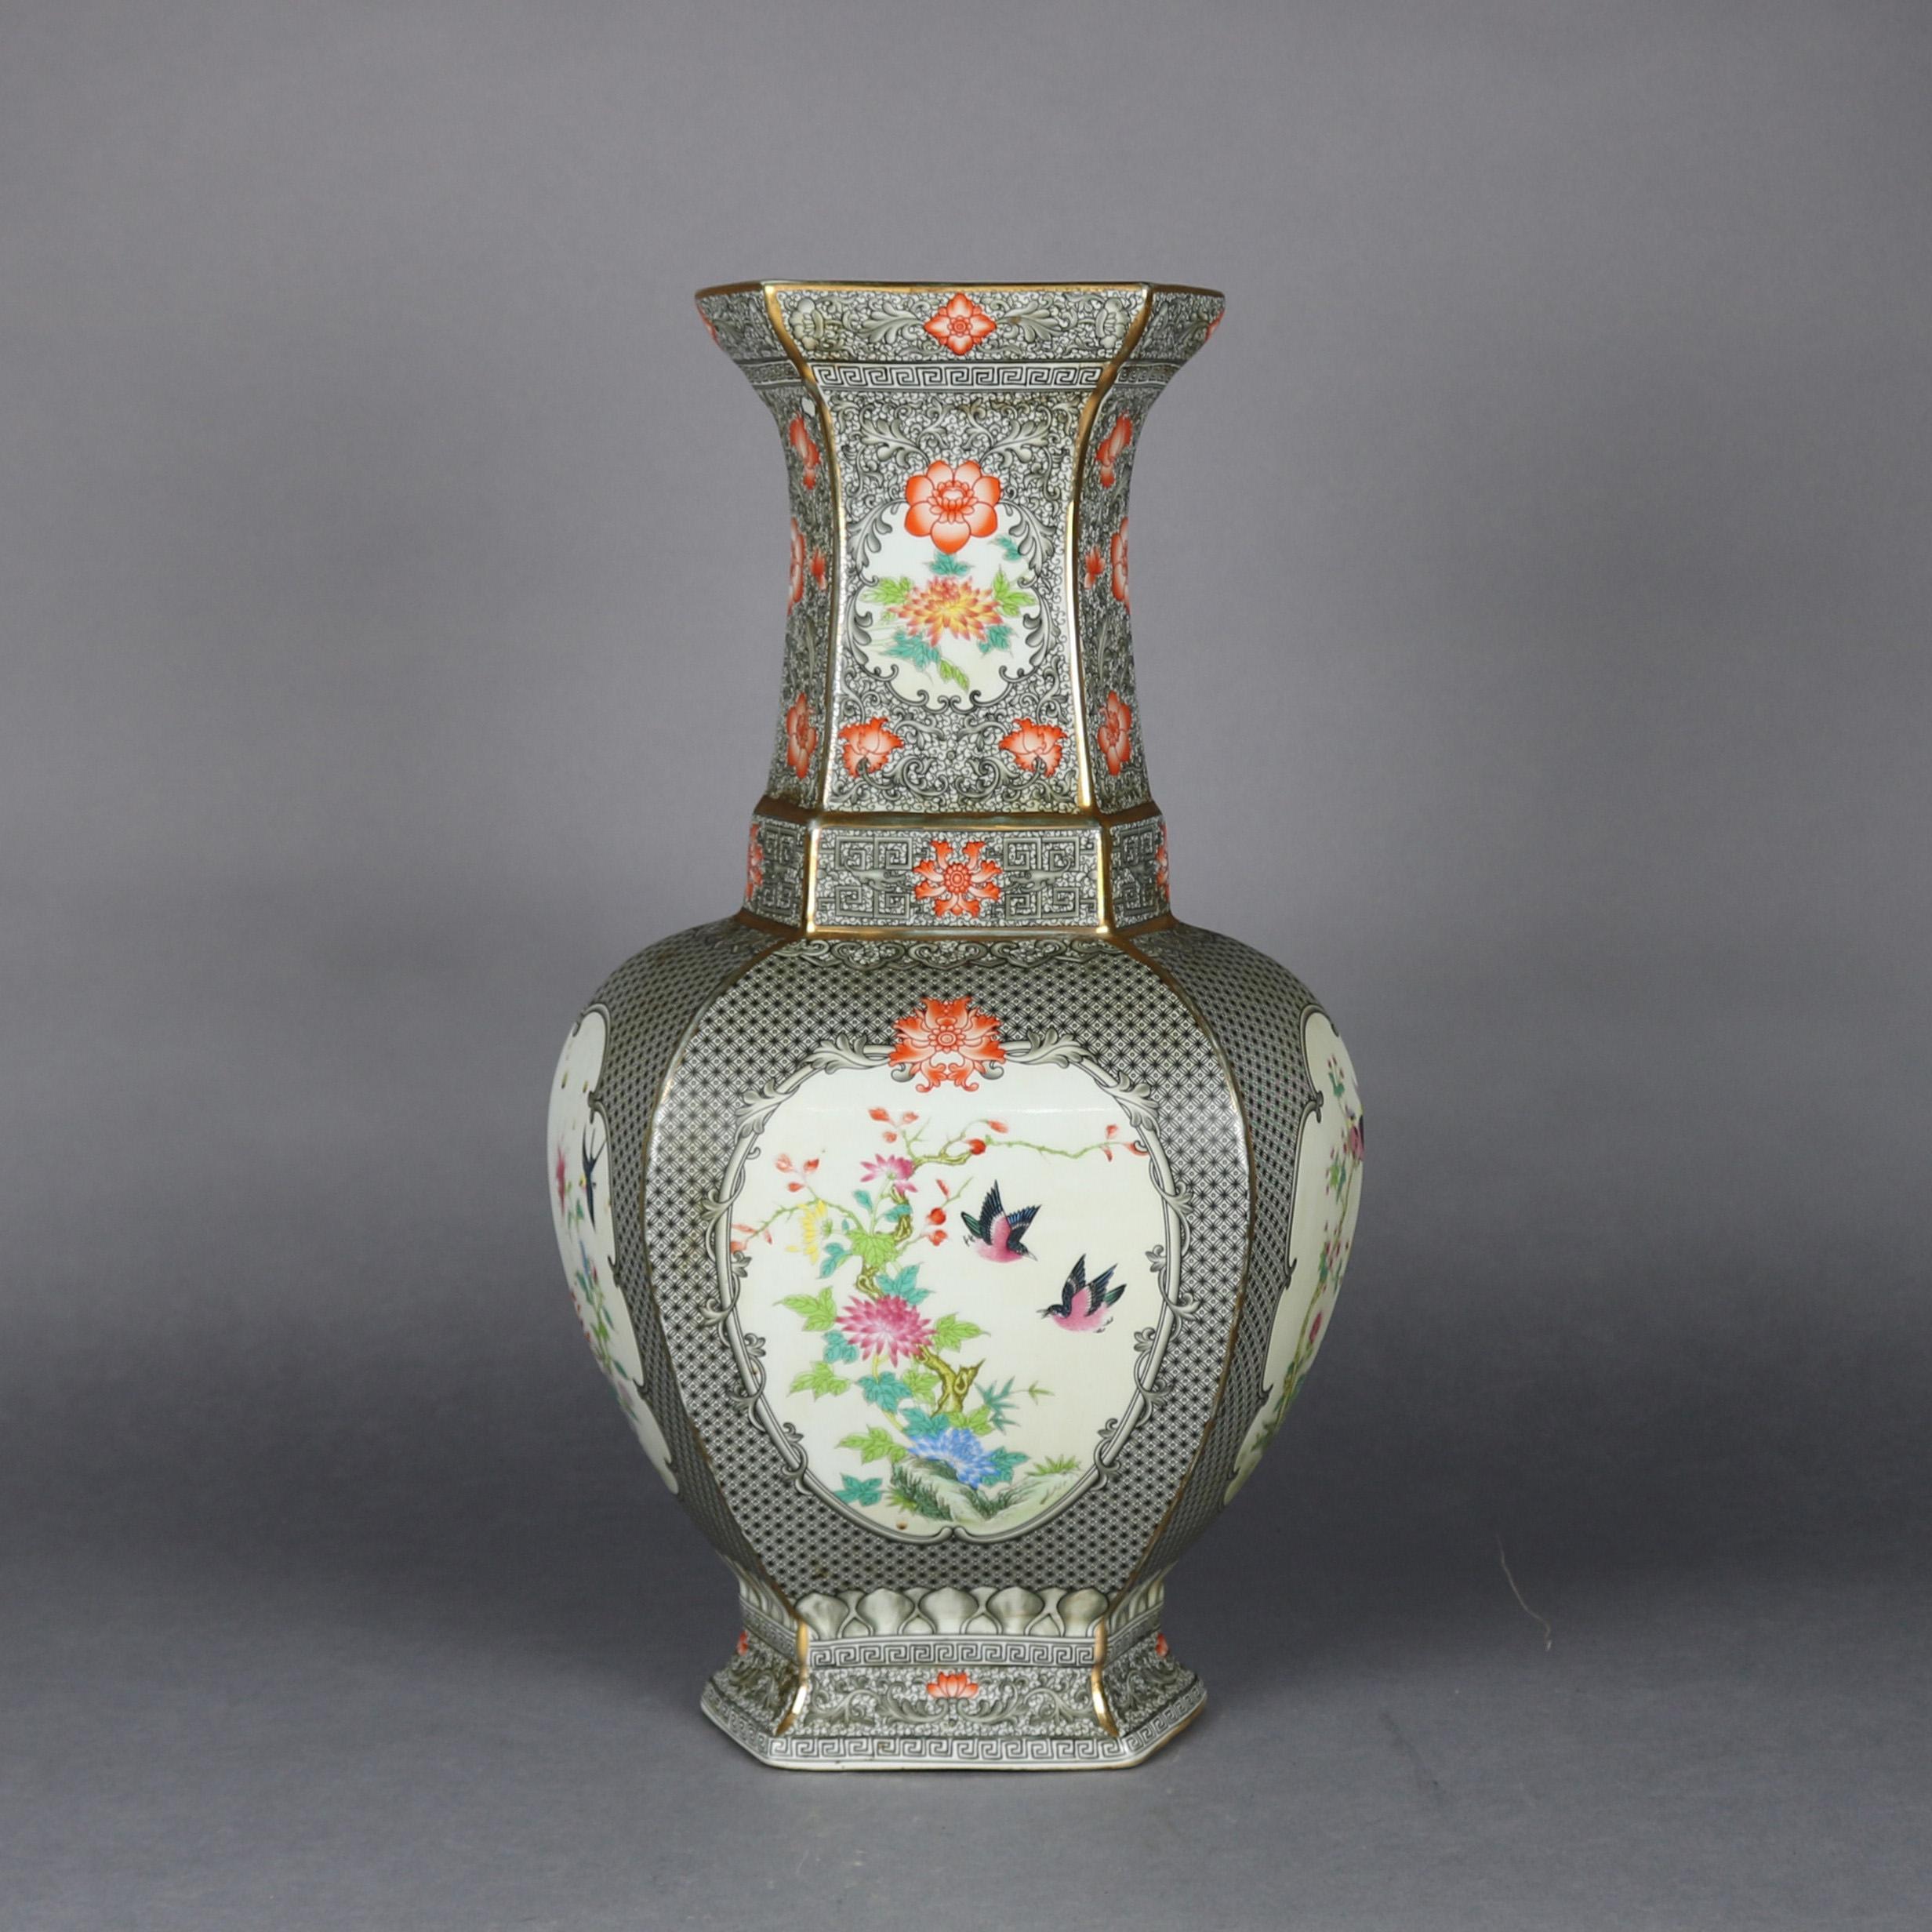 An antique oversized Chinese export porcelain vase features faceted bulbous form with all-over diaper decoration with hand painted reserves of garden scenes including flowers and birds, Greek Key bordering throughout, signed on base, 19th